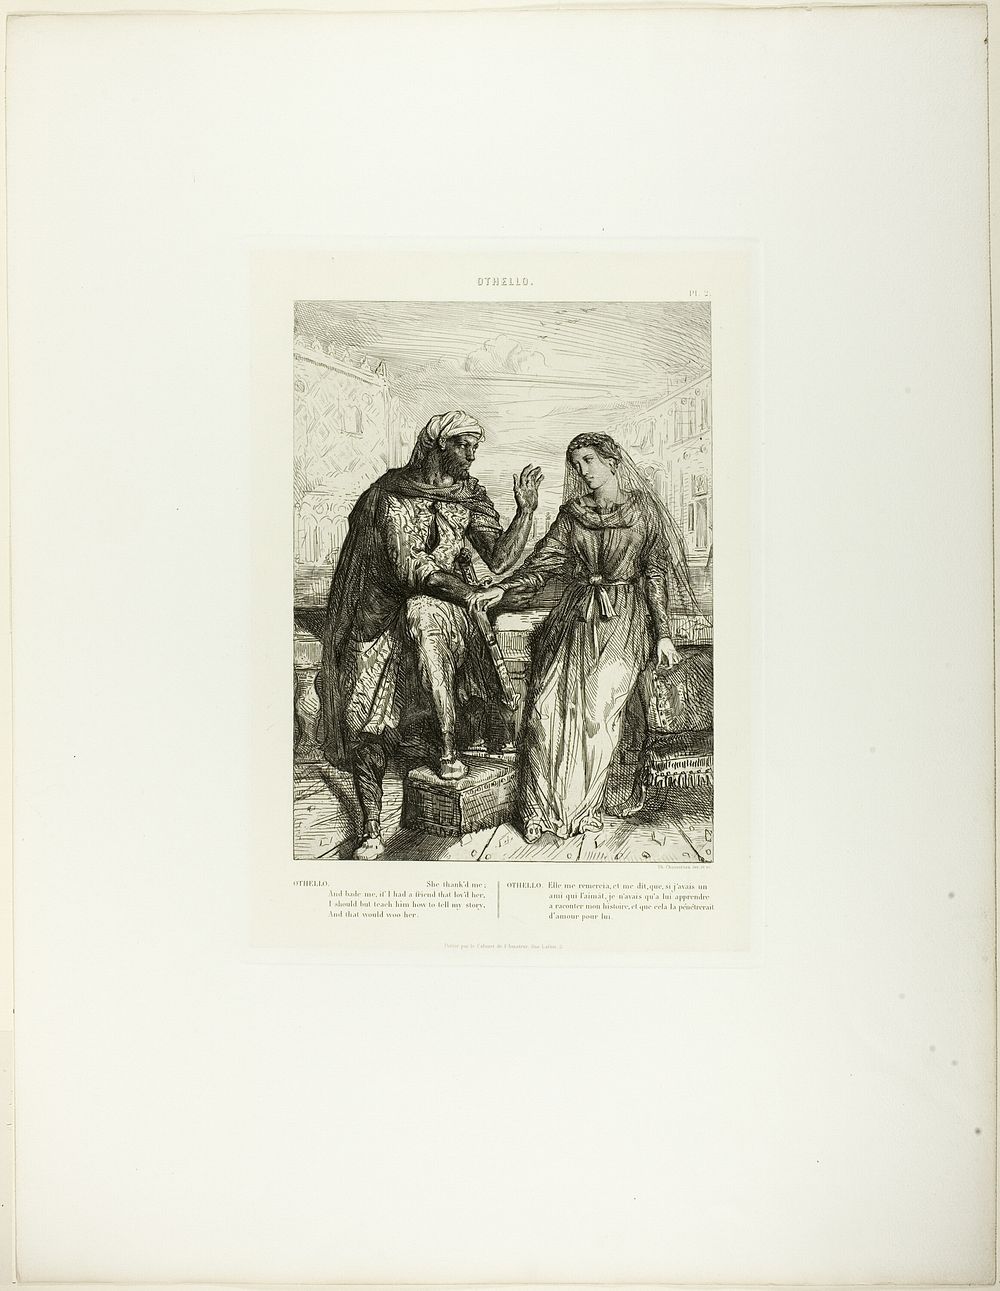 She Thank’d Me, plate 2 (act 1, scene 3), from Othello by Théodore Chassériau